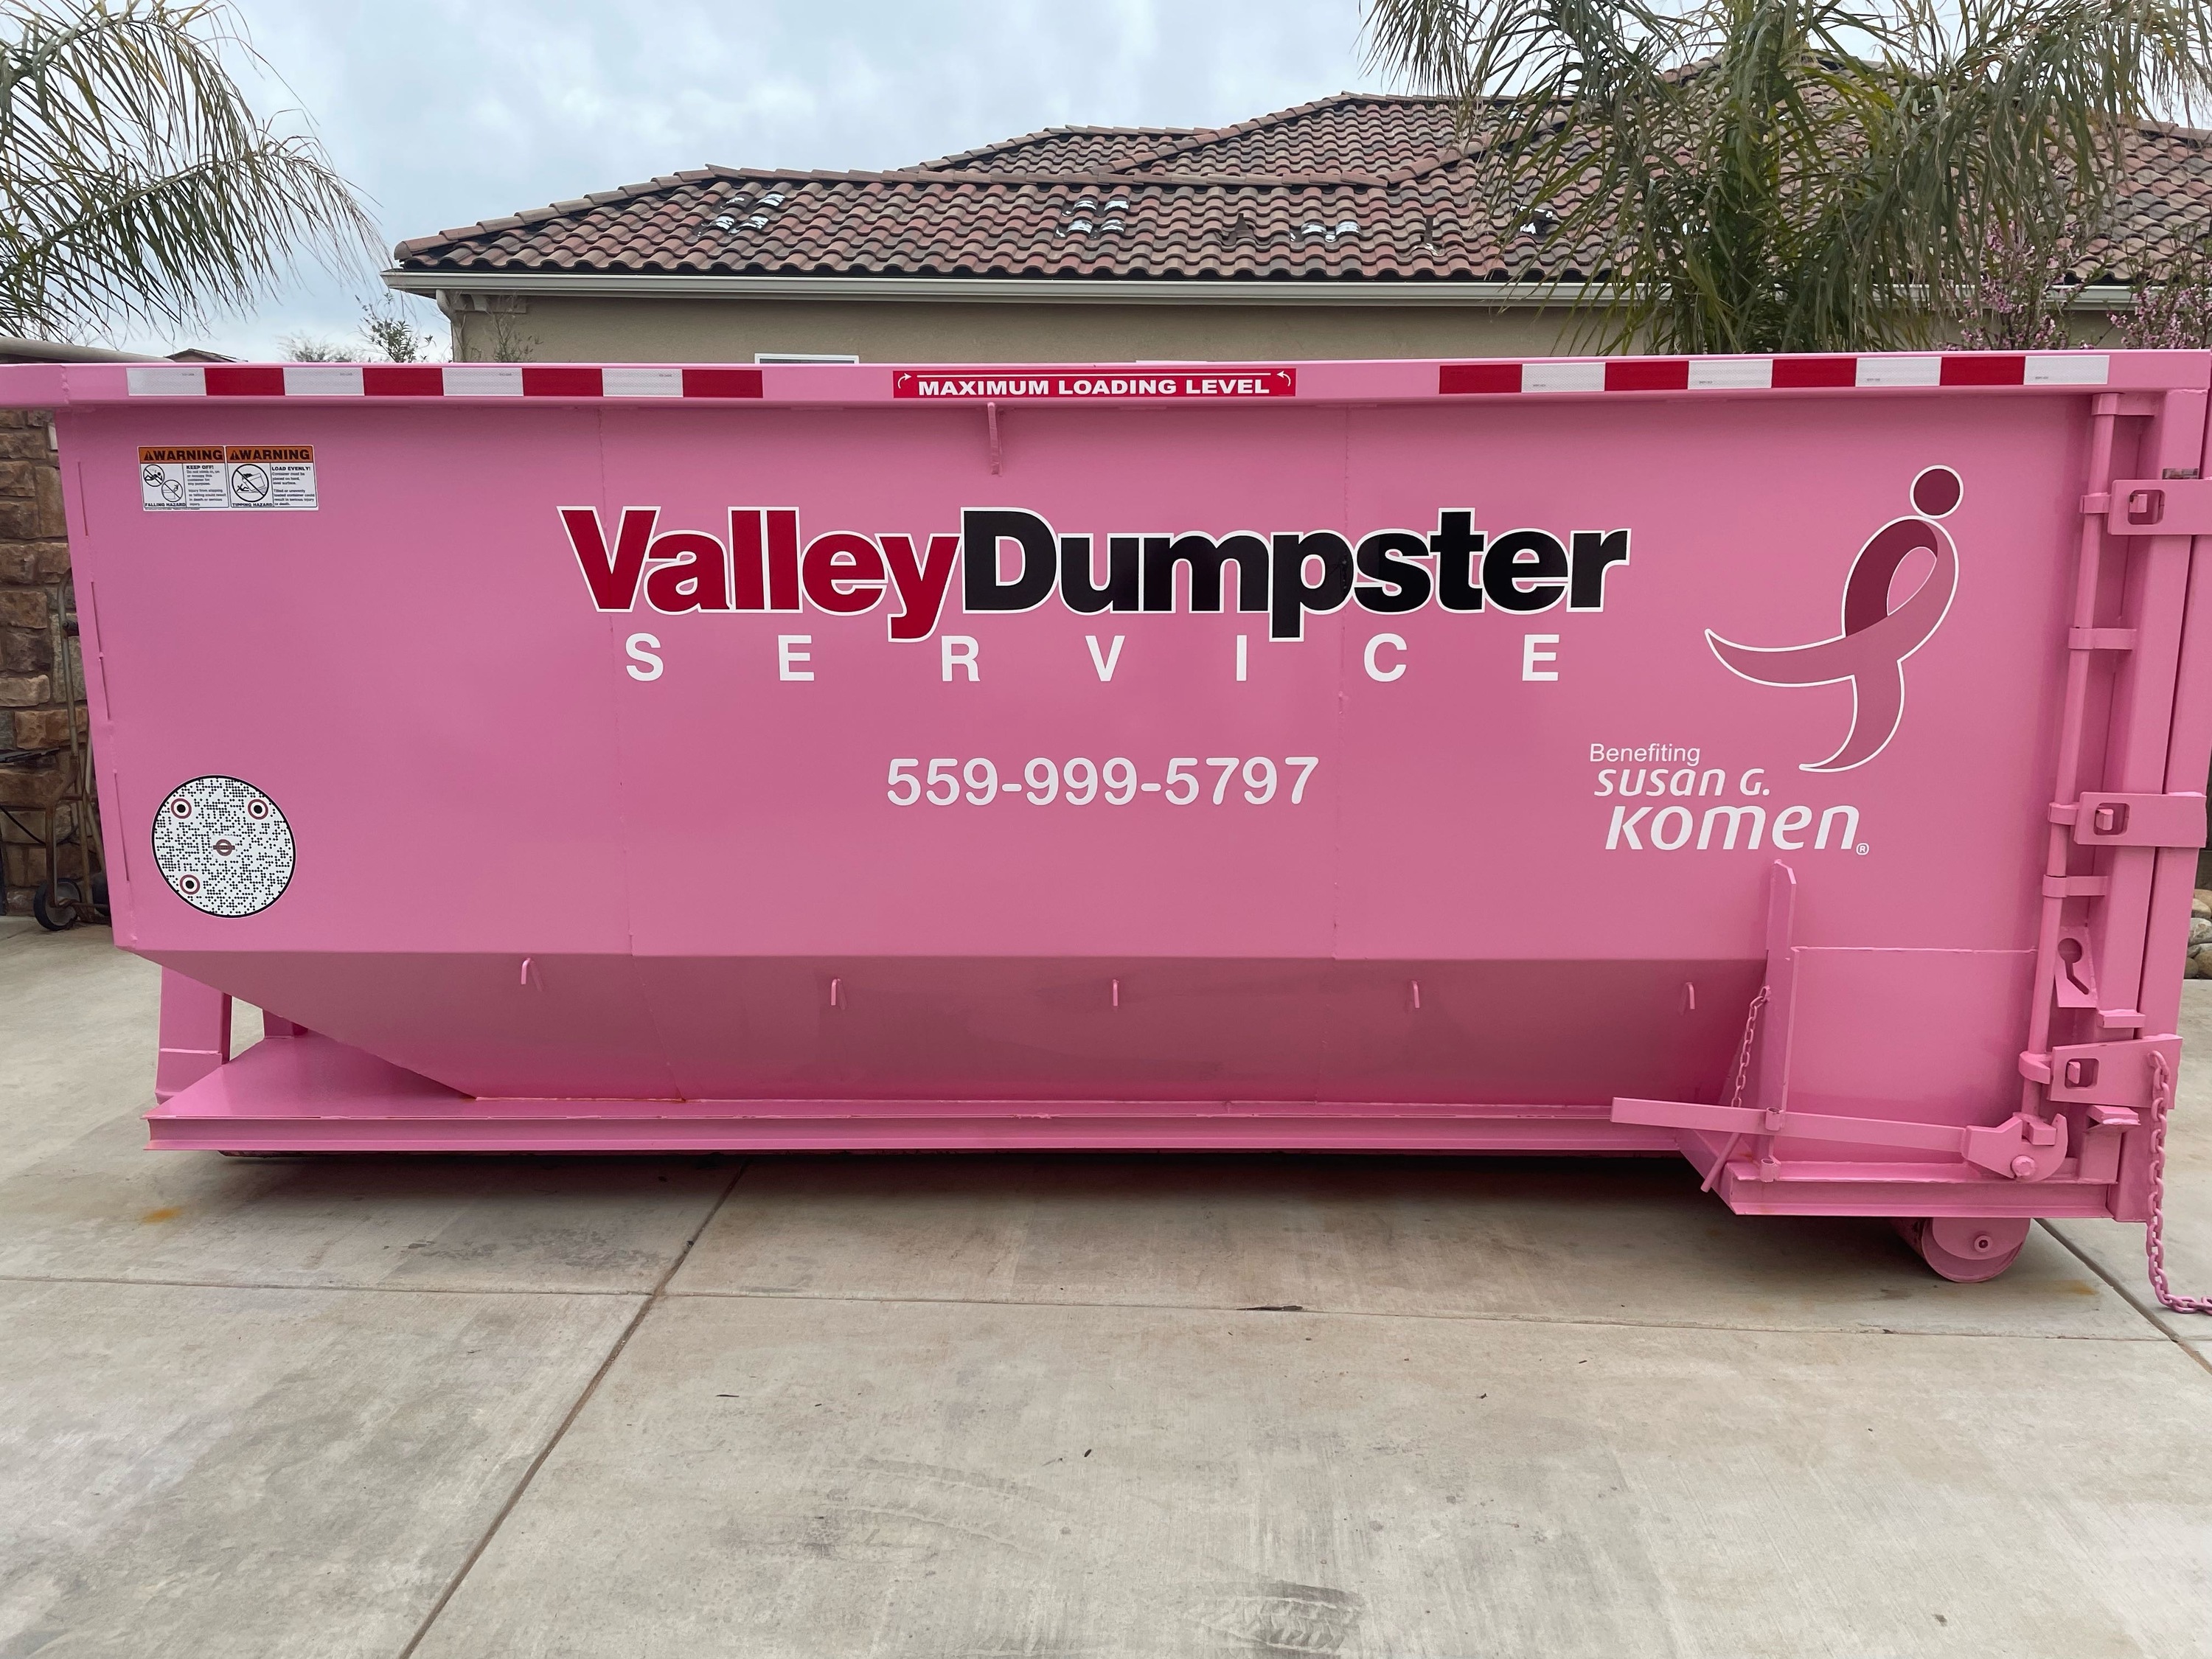 Why Choose Us for a Kingsburg CA Dumpster Rental That Won’t Disappoint